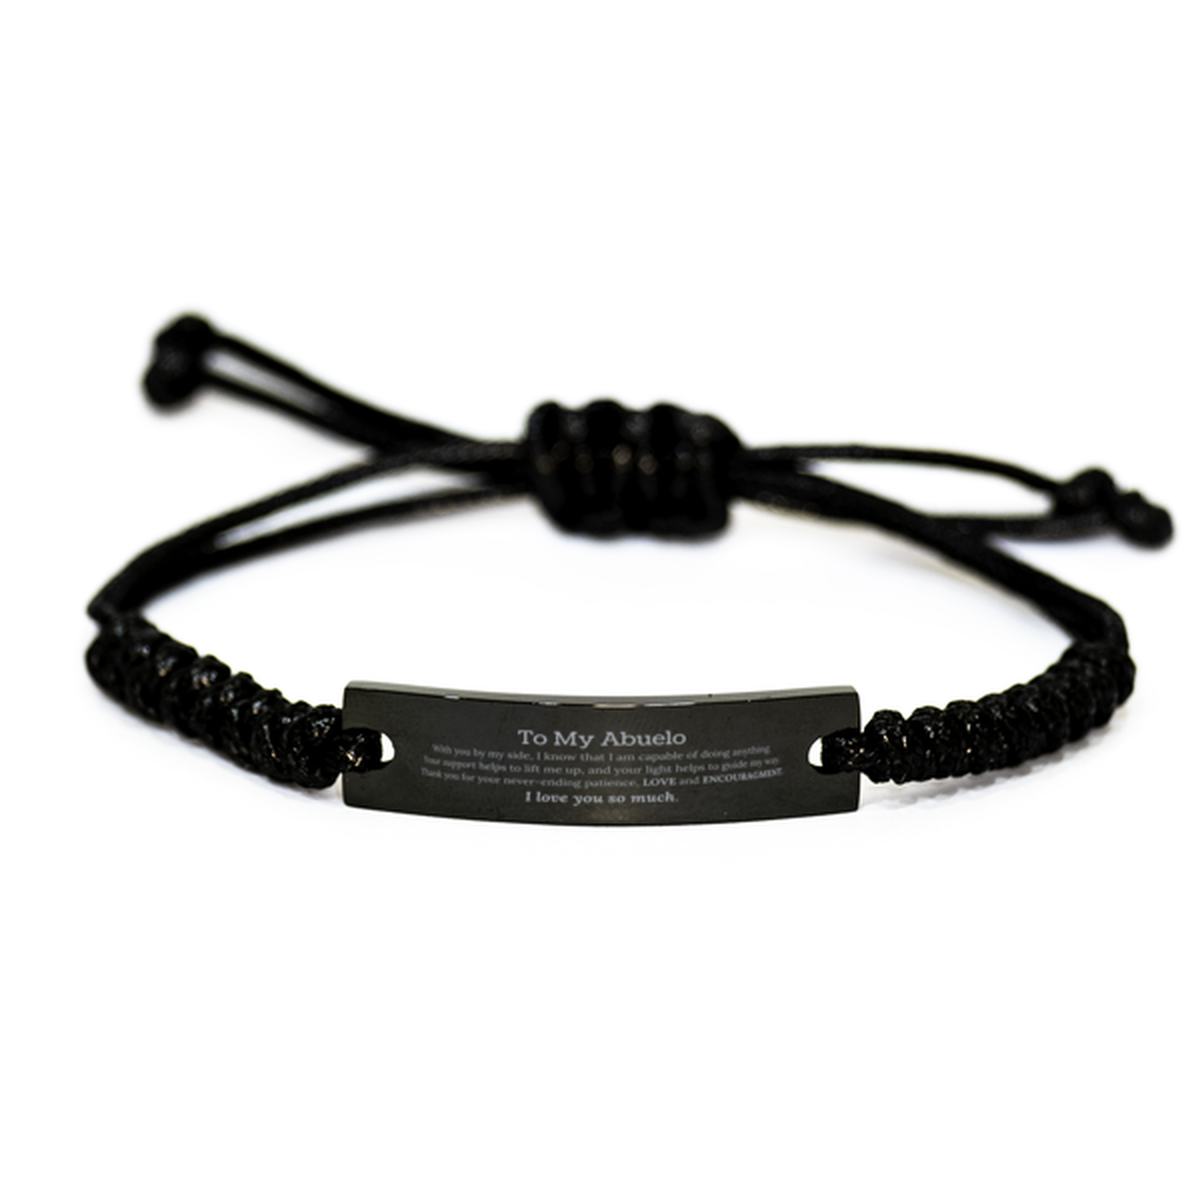 Appreciation Abuelo Black Rope Bracelet Gifts, To My Abuelo Birthday Christmas Wedding Keepsake Gifts for Abuelo With you by my side, I know that I am capable of doing anything. I love you so much